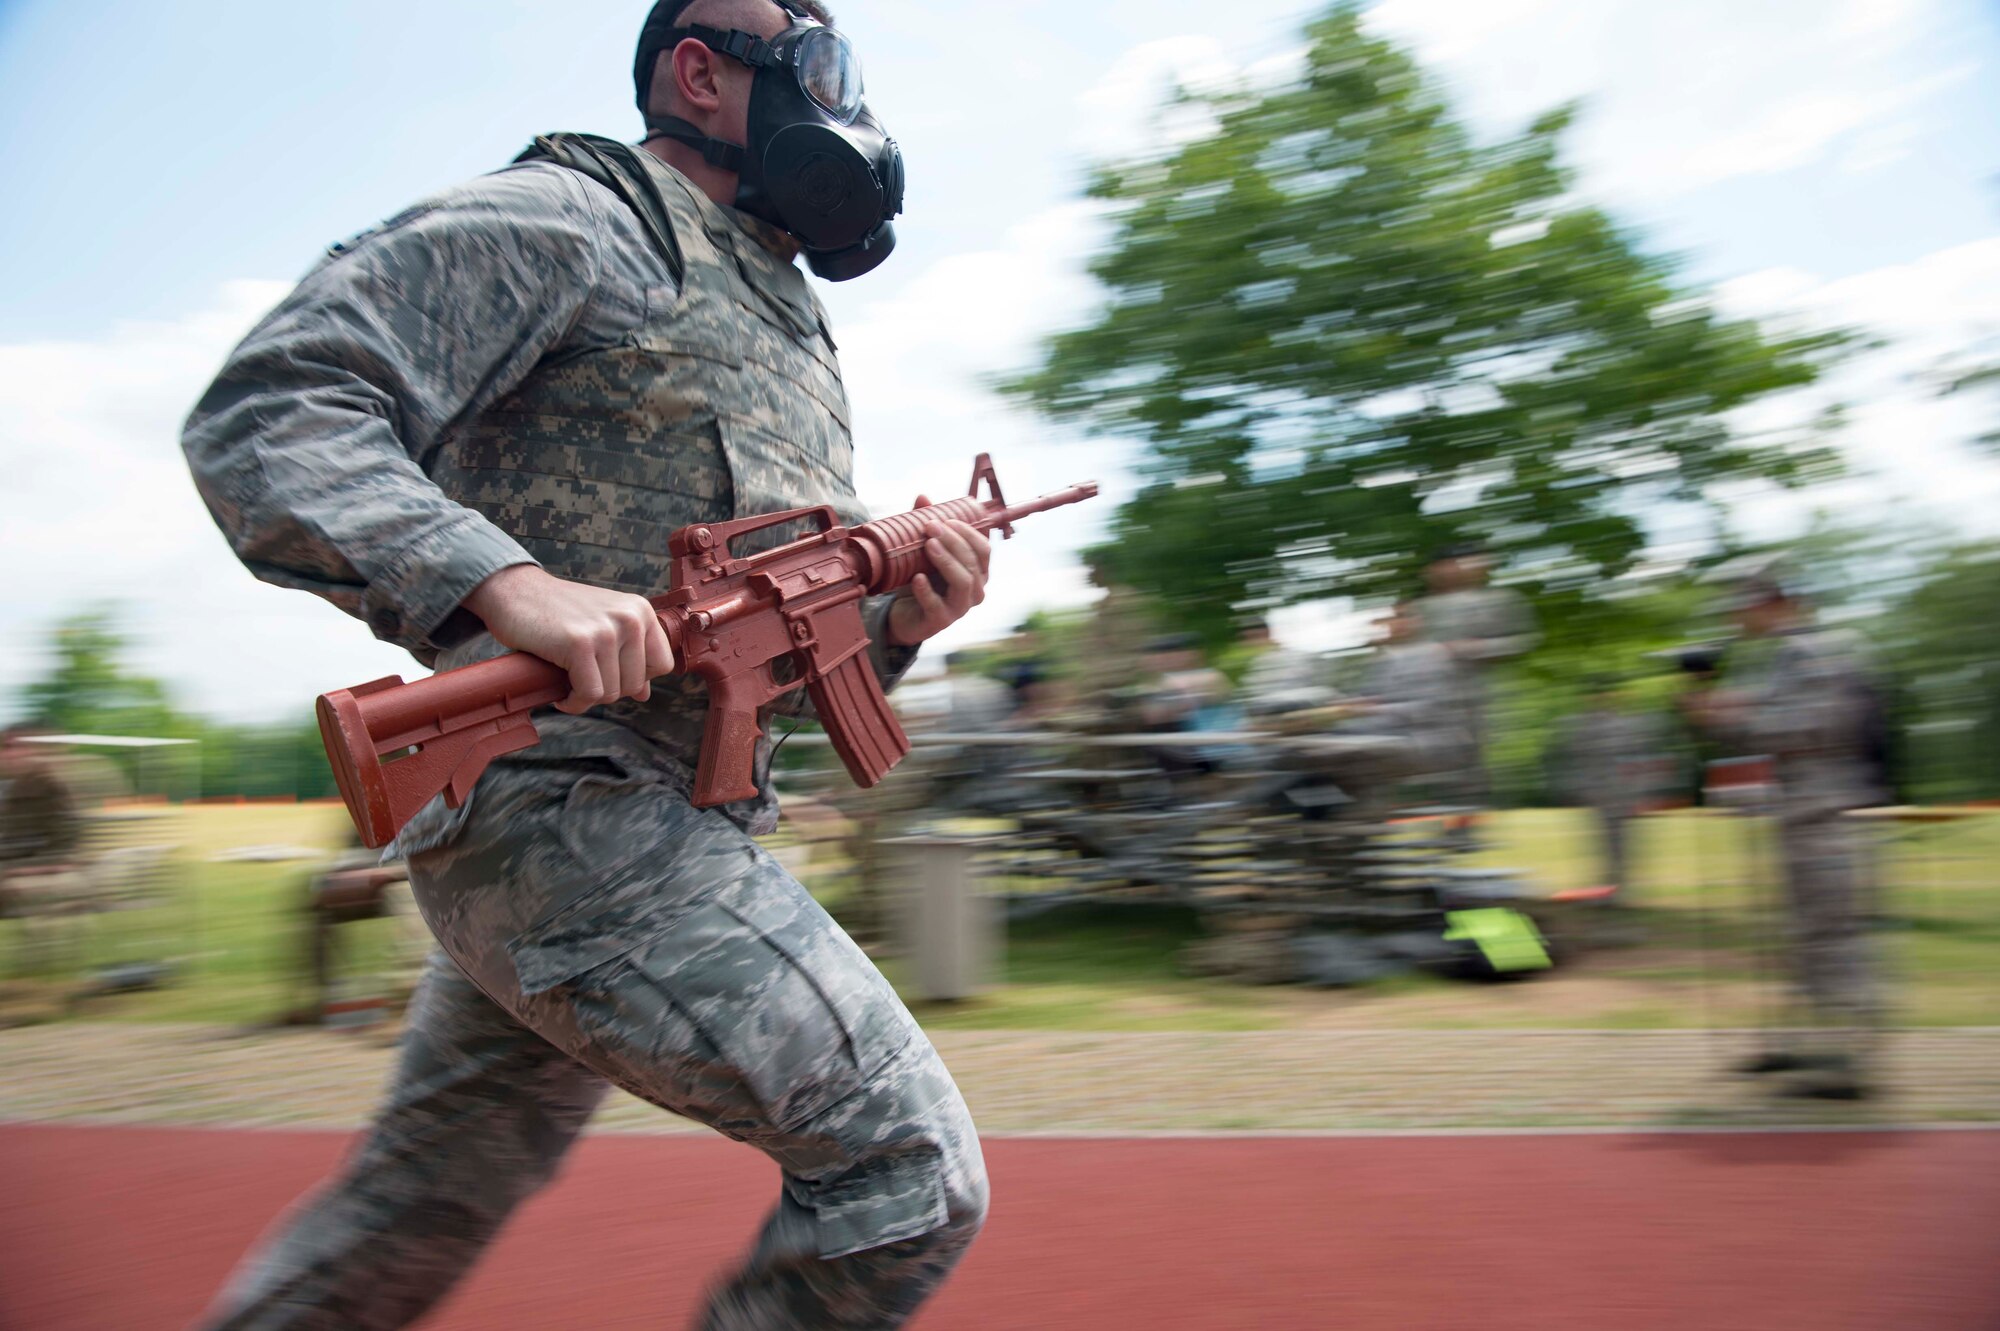 A U.S. Airman participates in a relay race during the Police Week 2018 Battle of the Badges on Ramstein Air Base, Germany, May 15, 2018. The events of Police Week raise money to go towards organizations that support law enforcement officers who died in the line of duty or survived a traumatic experience.